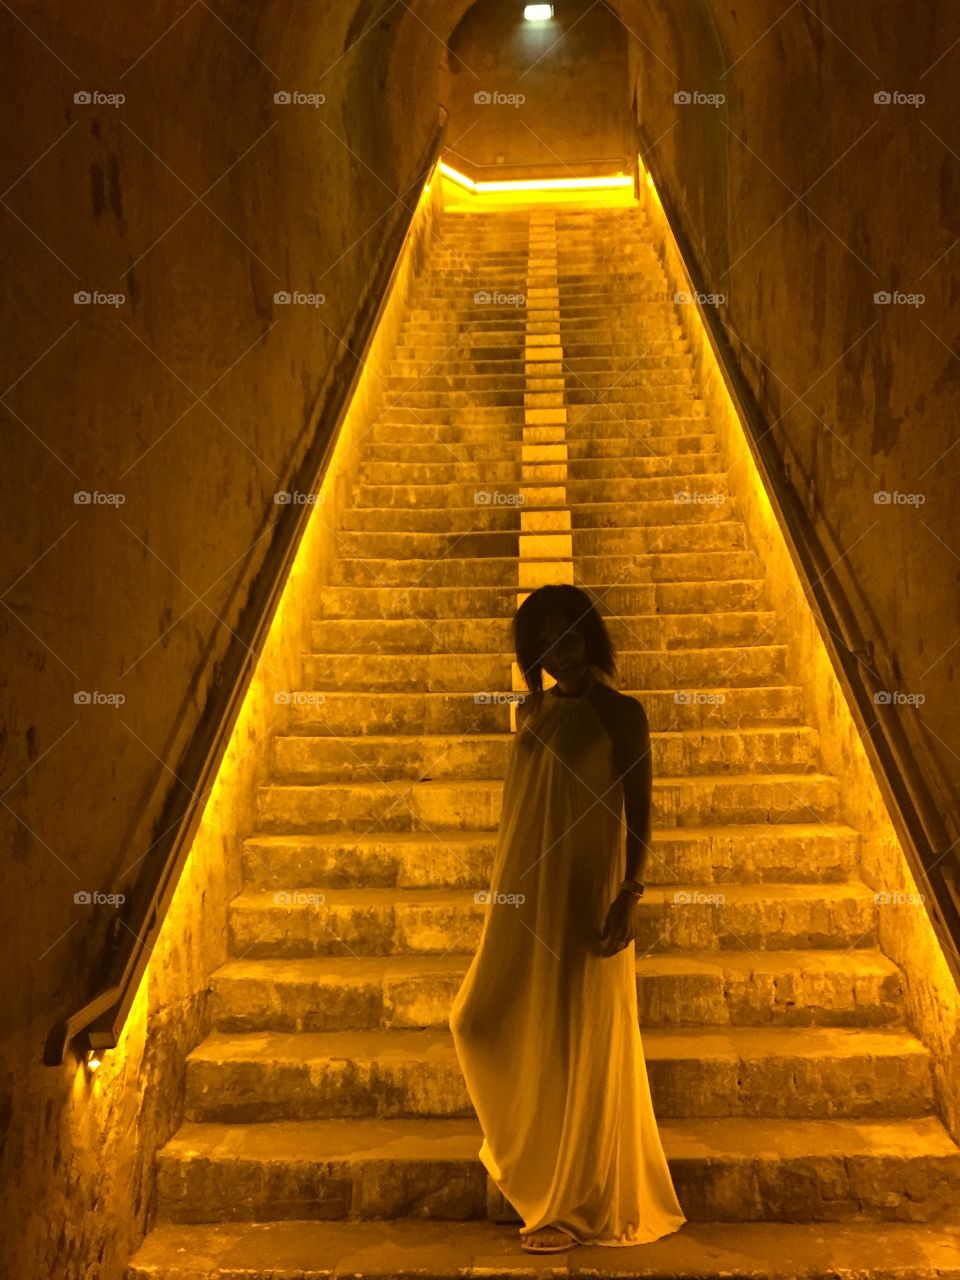 Along the steps of the wine cellar at Veuve Clicquot in France. The lighting and yellow background made for this mysterious goddess-like photo. 